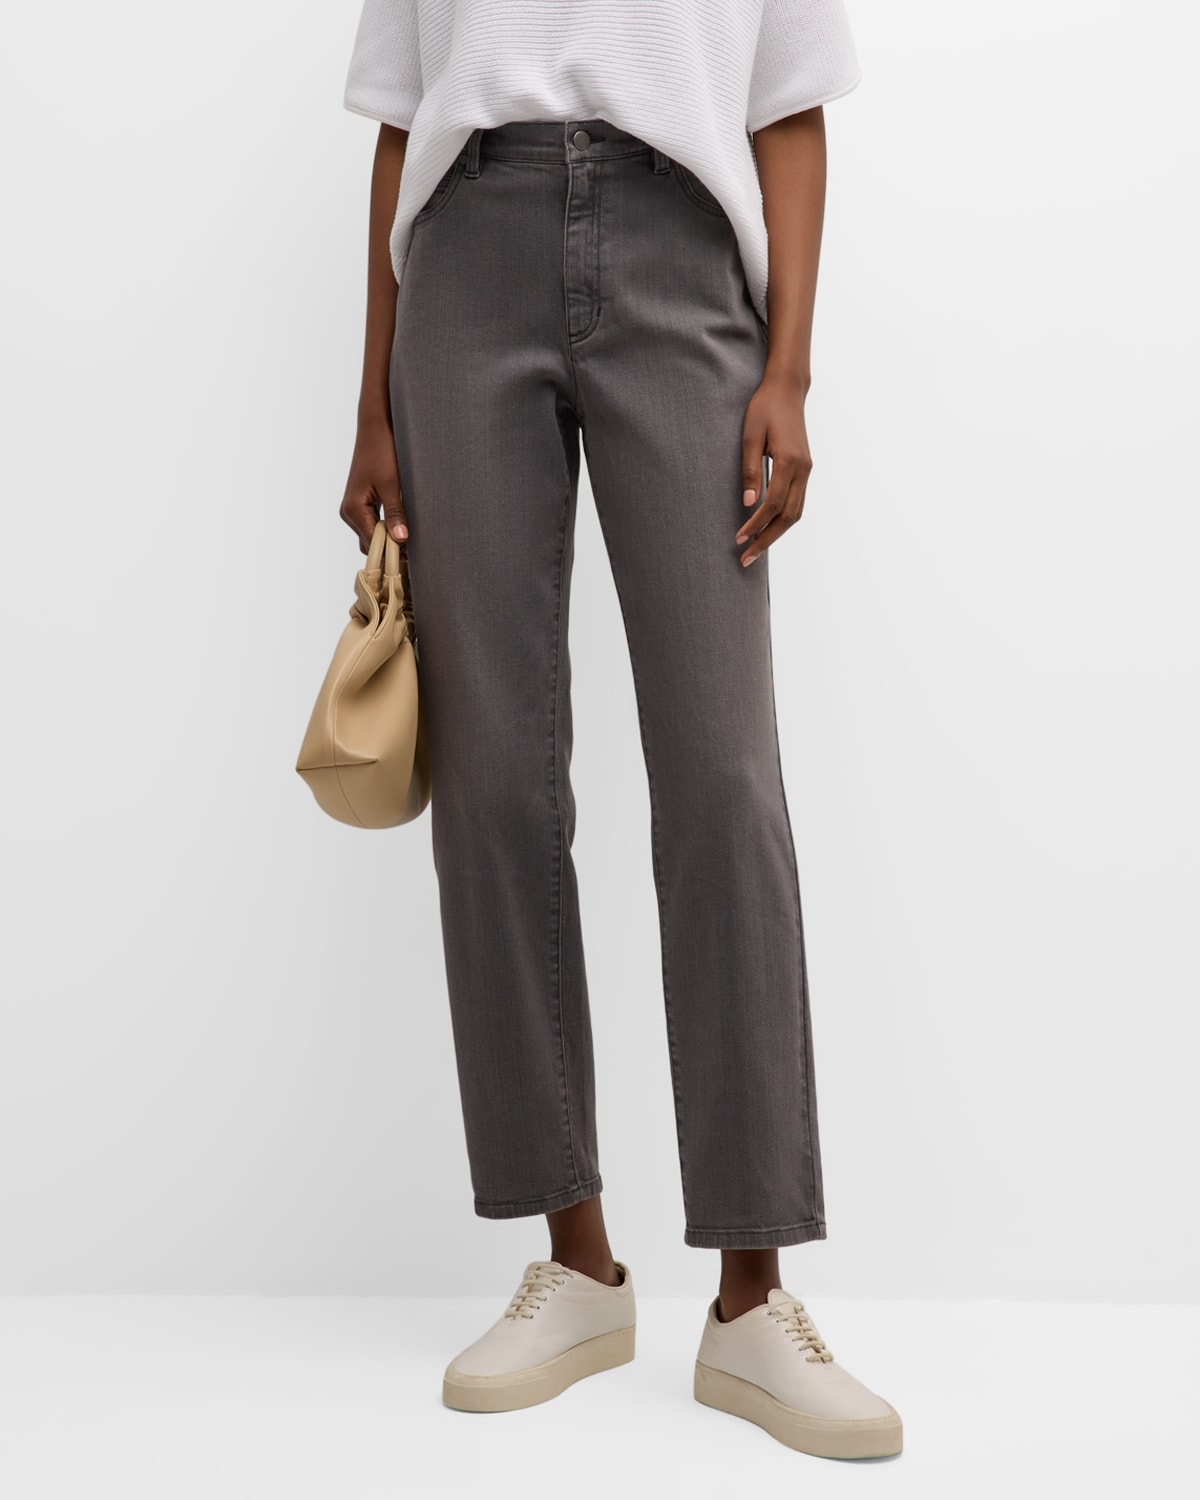 EILEEN FISHER MISSY ORGANIC COTTON STRETCHED DENIM JEANS